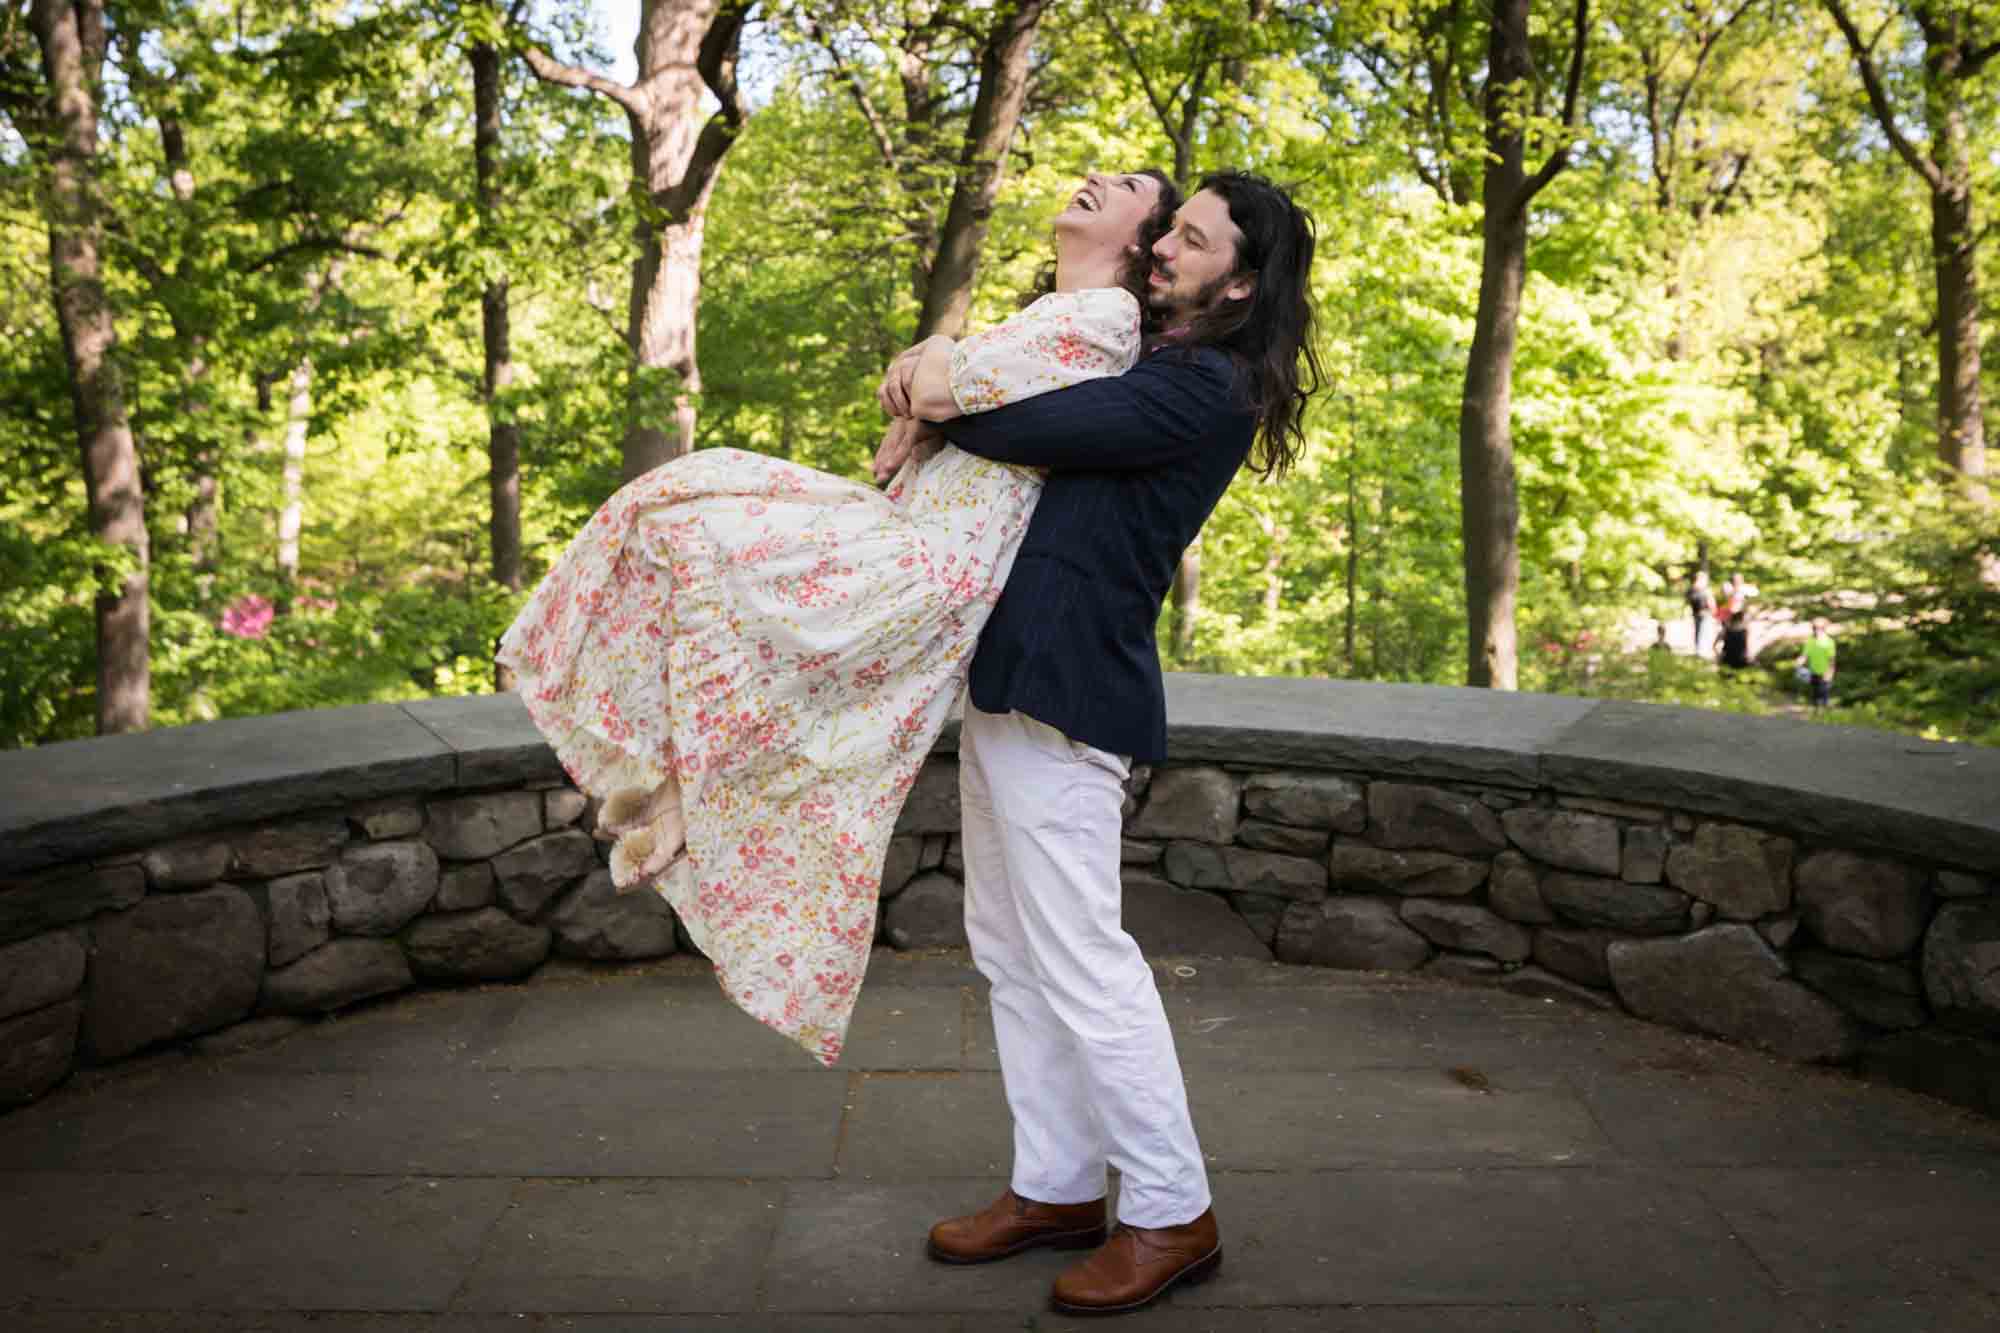 Man picking up woman in the New York Botanical Garden during an engagement photo shoot